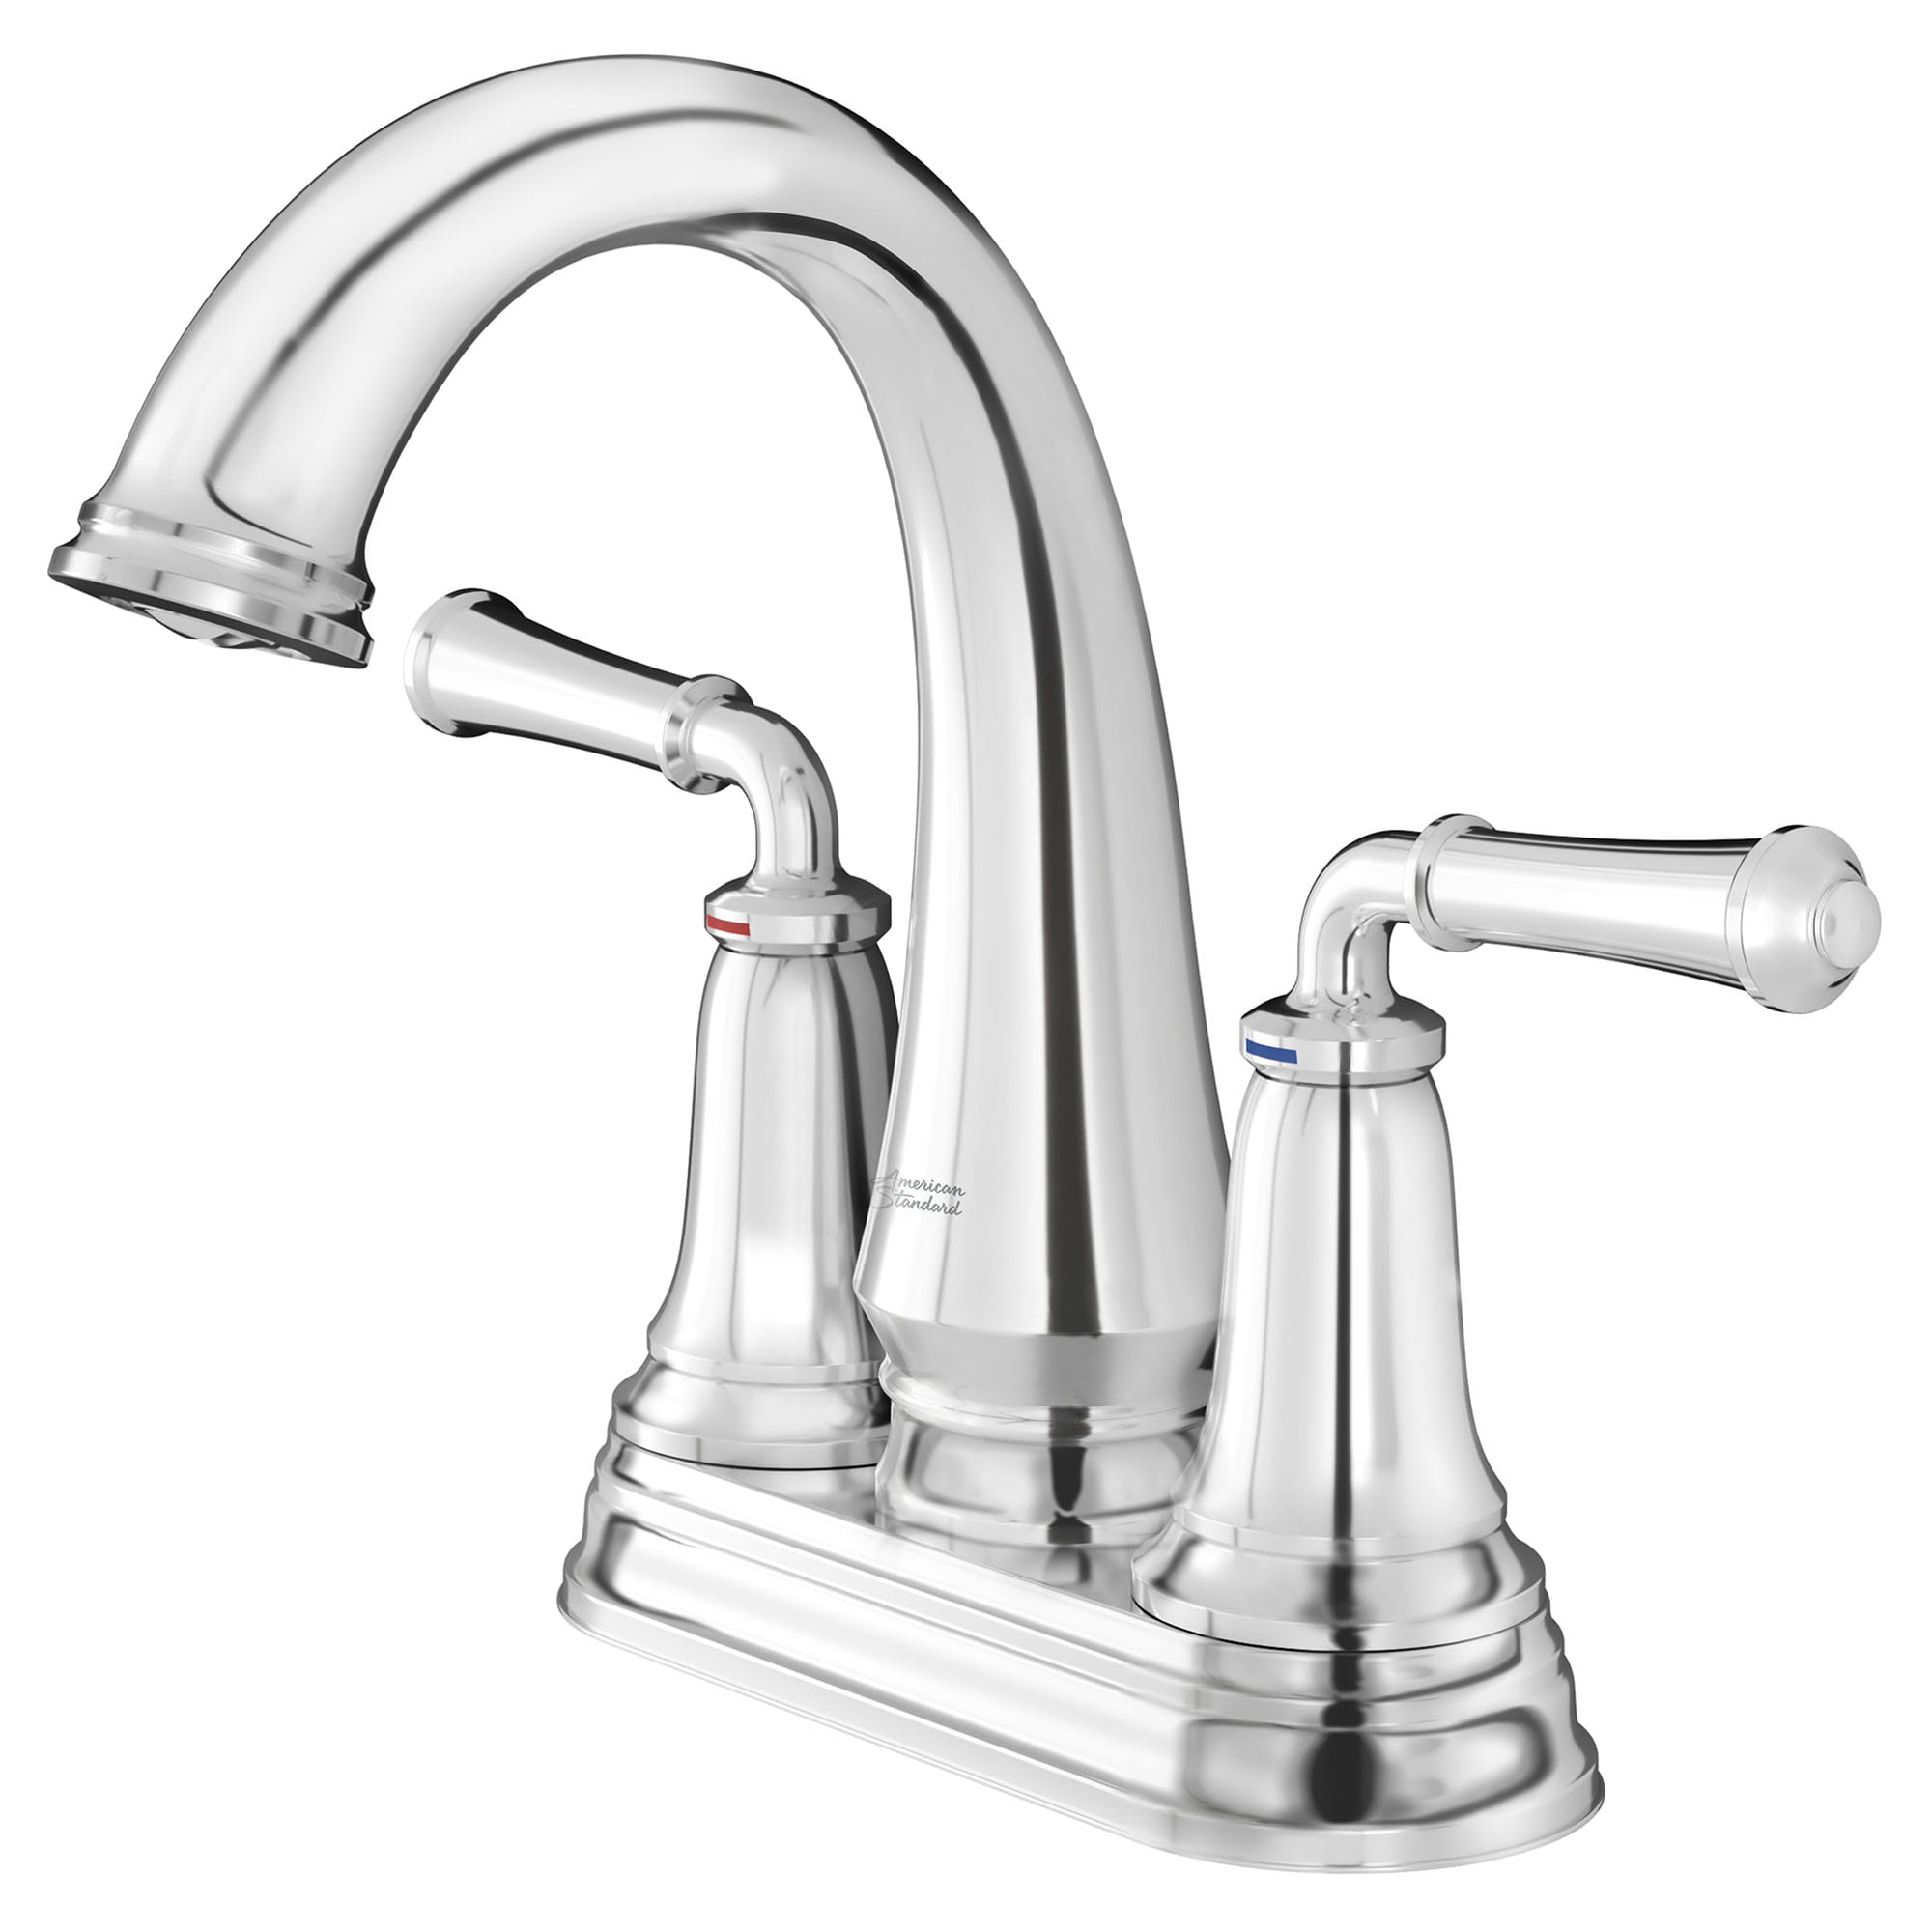 Delancey 4 Inch Centerset 2 Handle Bathroom Faucet 12gpm 45 L min With Lever Handles CHROME